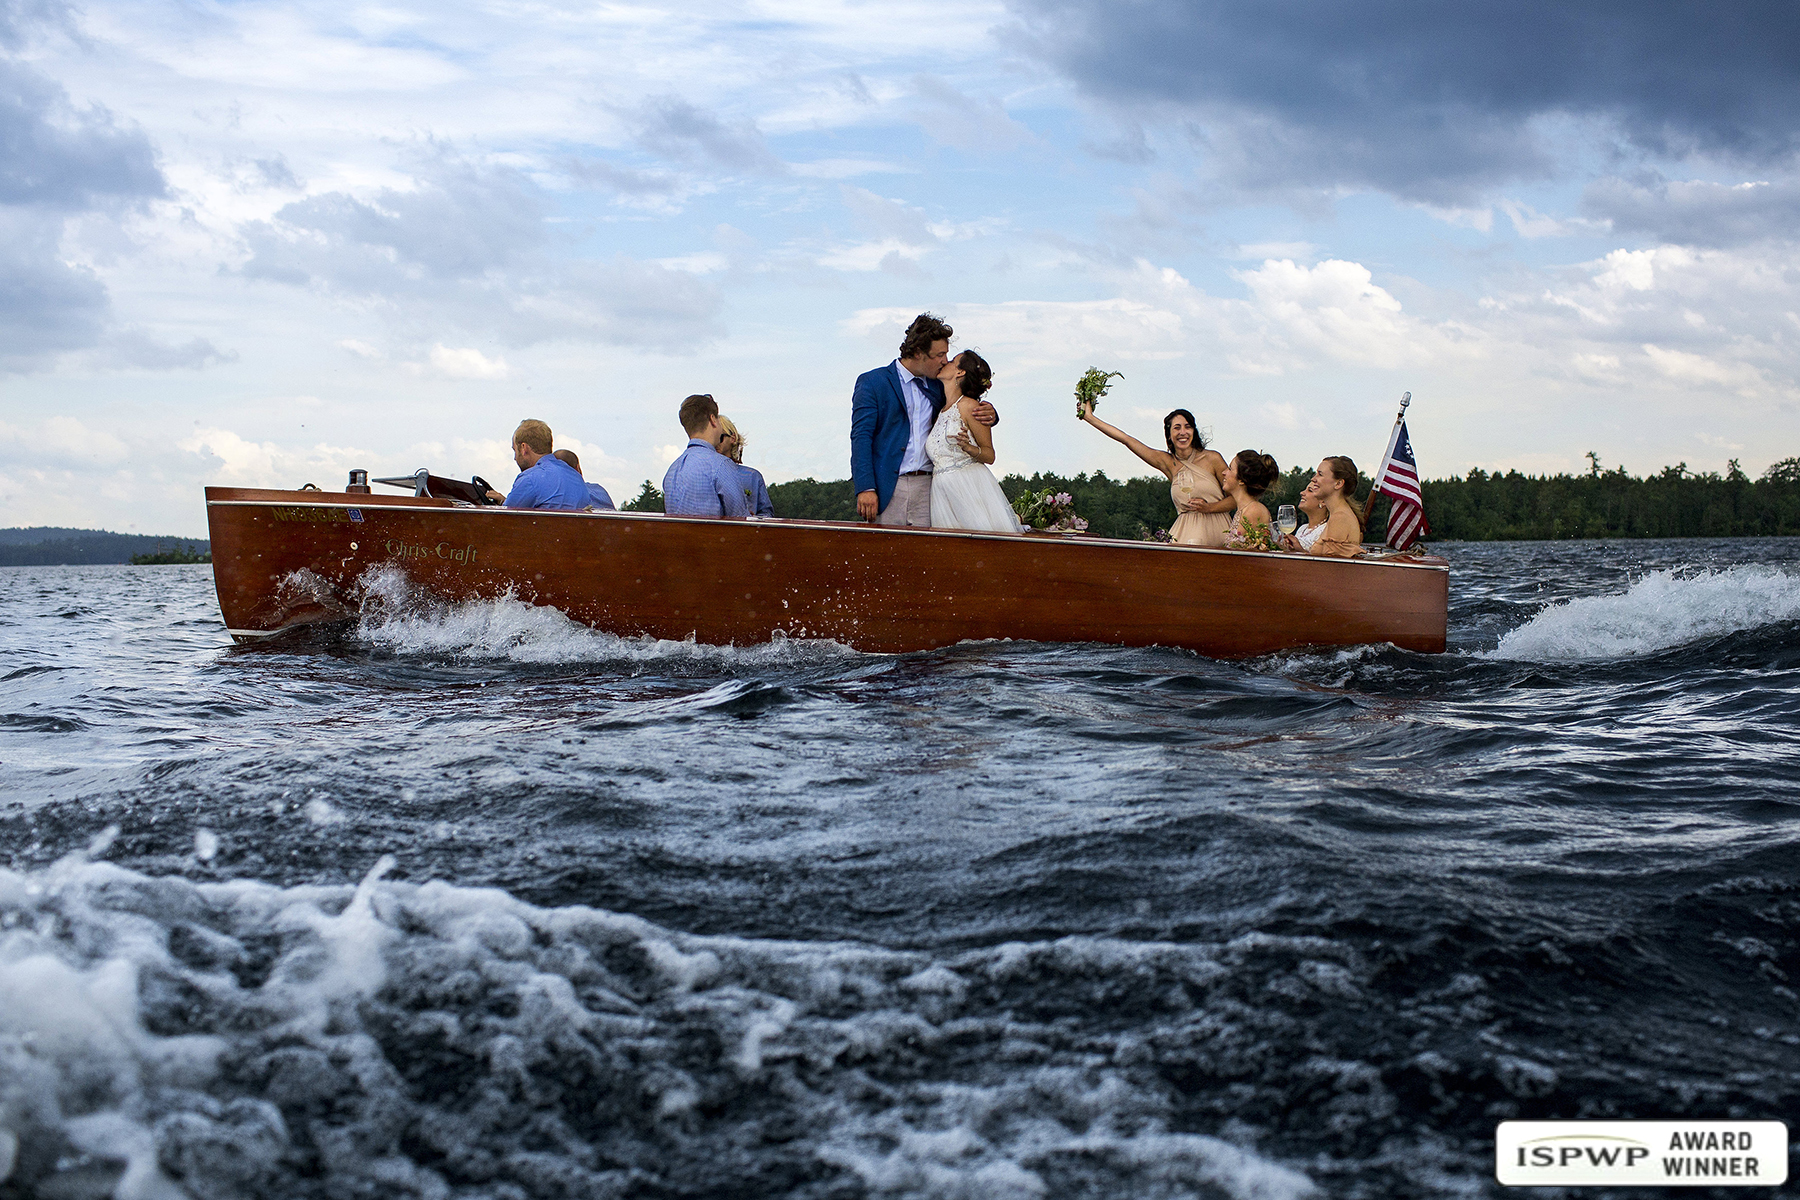 Squam Lake NH Wedding Photographer wins another award in ISPWP for the epic stormy Chris Craft boat photo of the wedding party